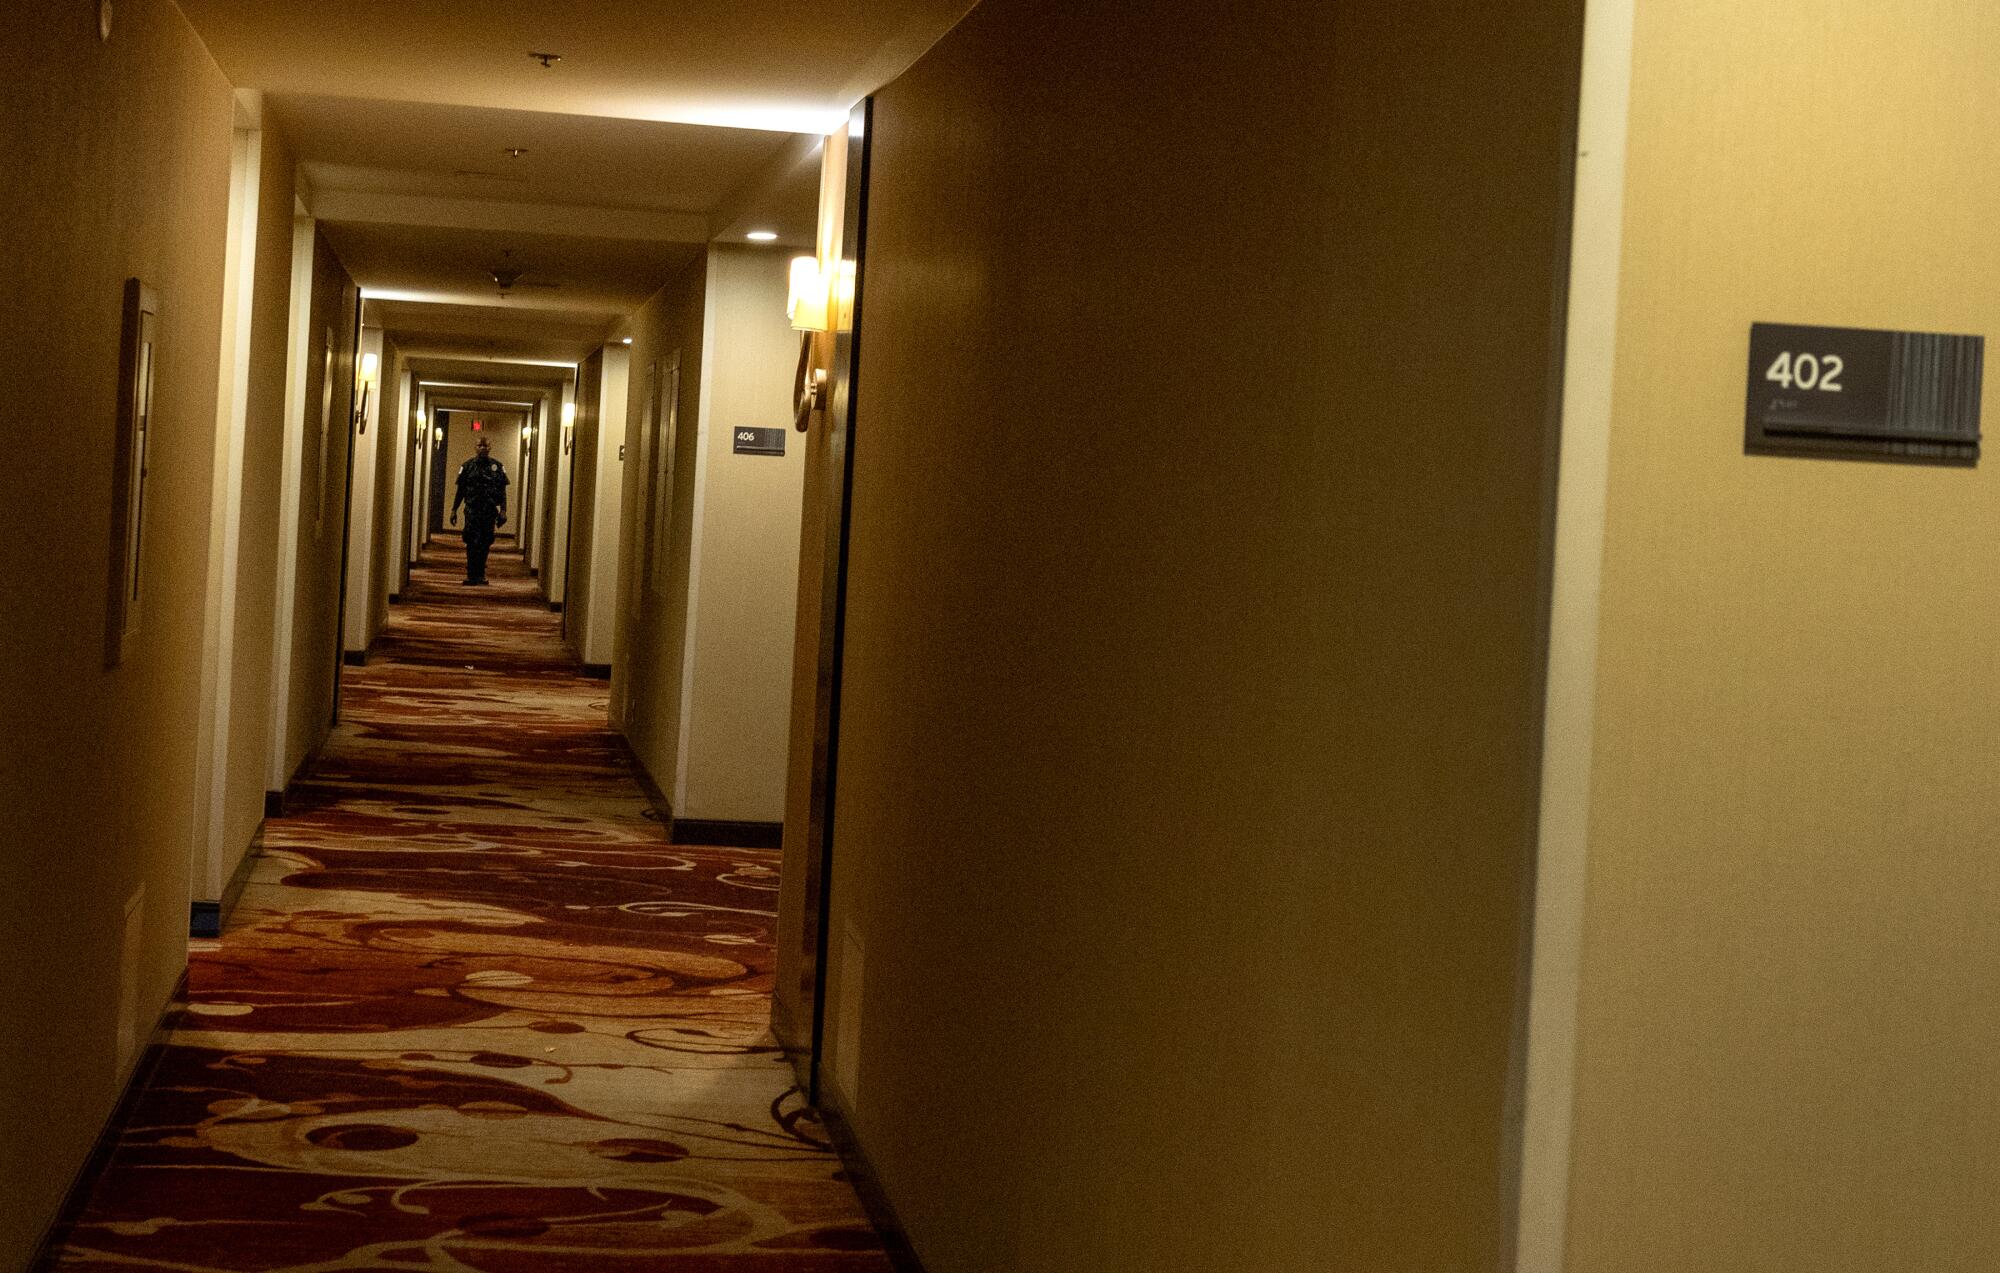 Security guards patrol the carpeted halls of the LA Grand Hotel.